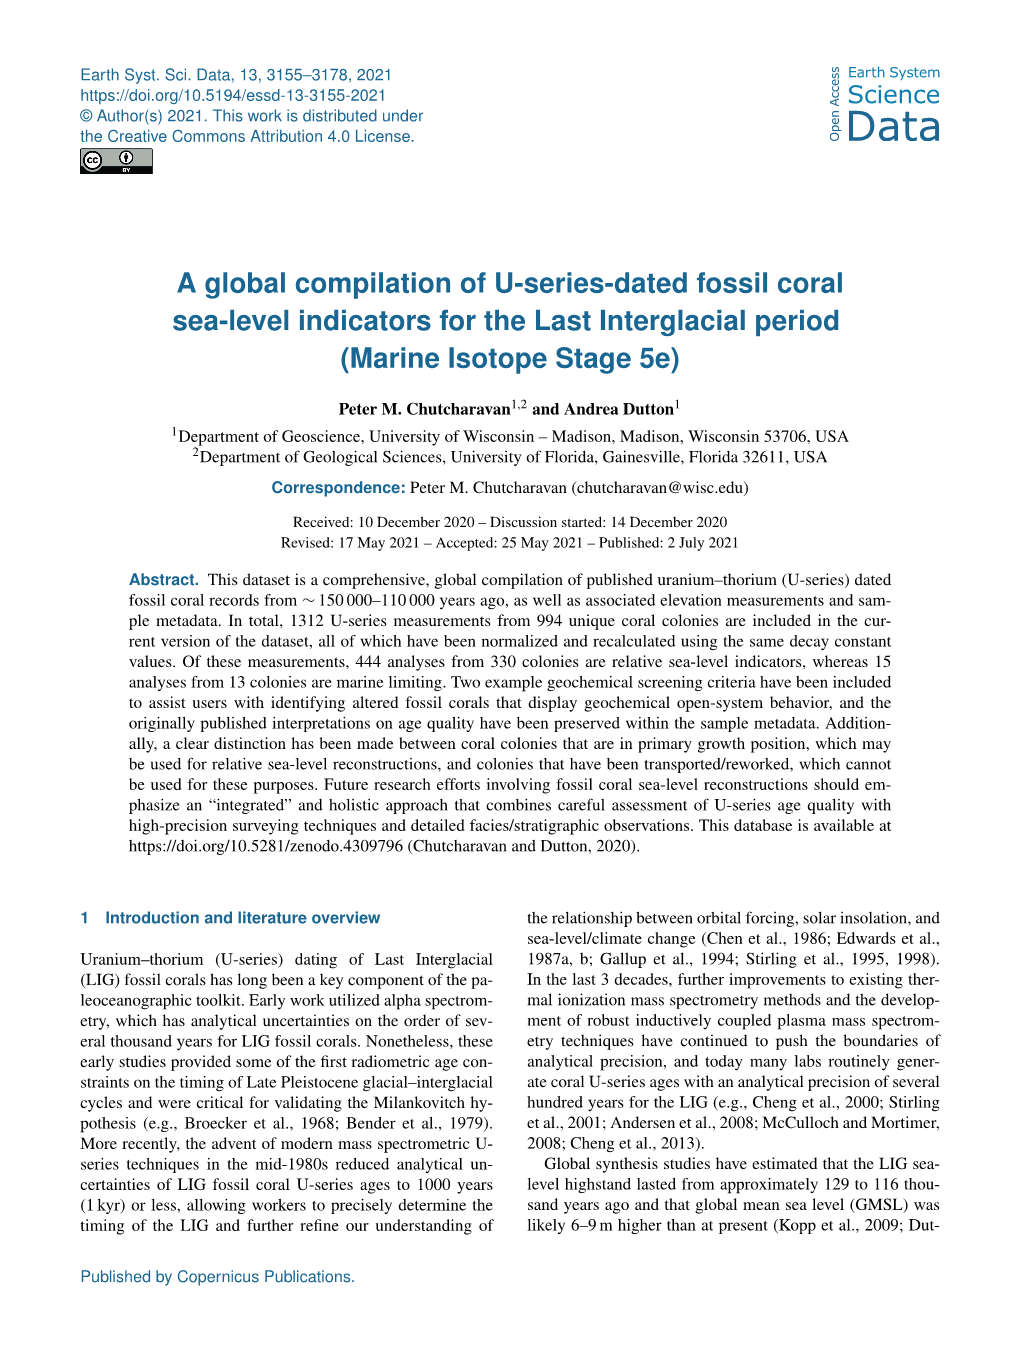 A Global Compilation of U-Series-Dated Fossil Coral Sea-Level Indicators for the Last Interglacial Period (Marine Isotope Stage 5E)